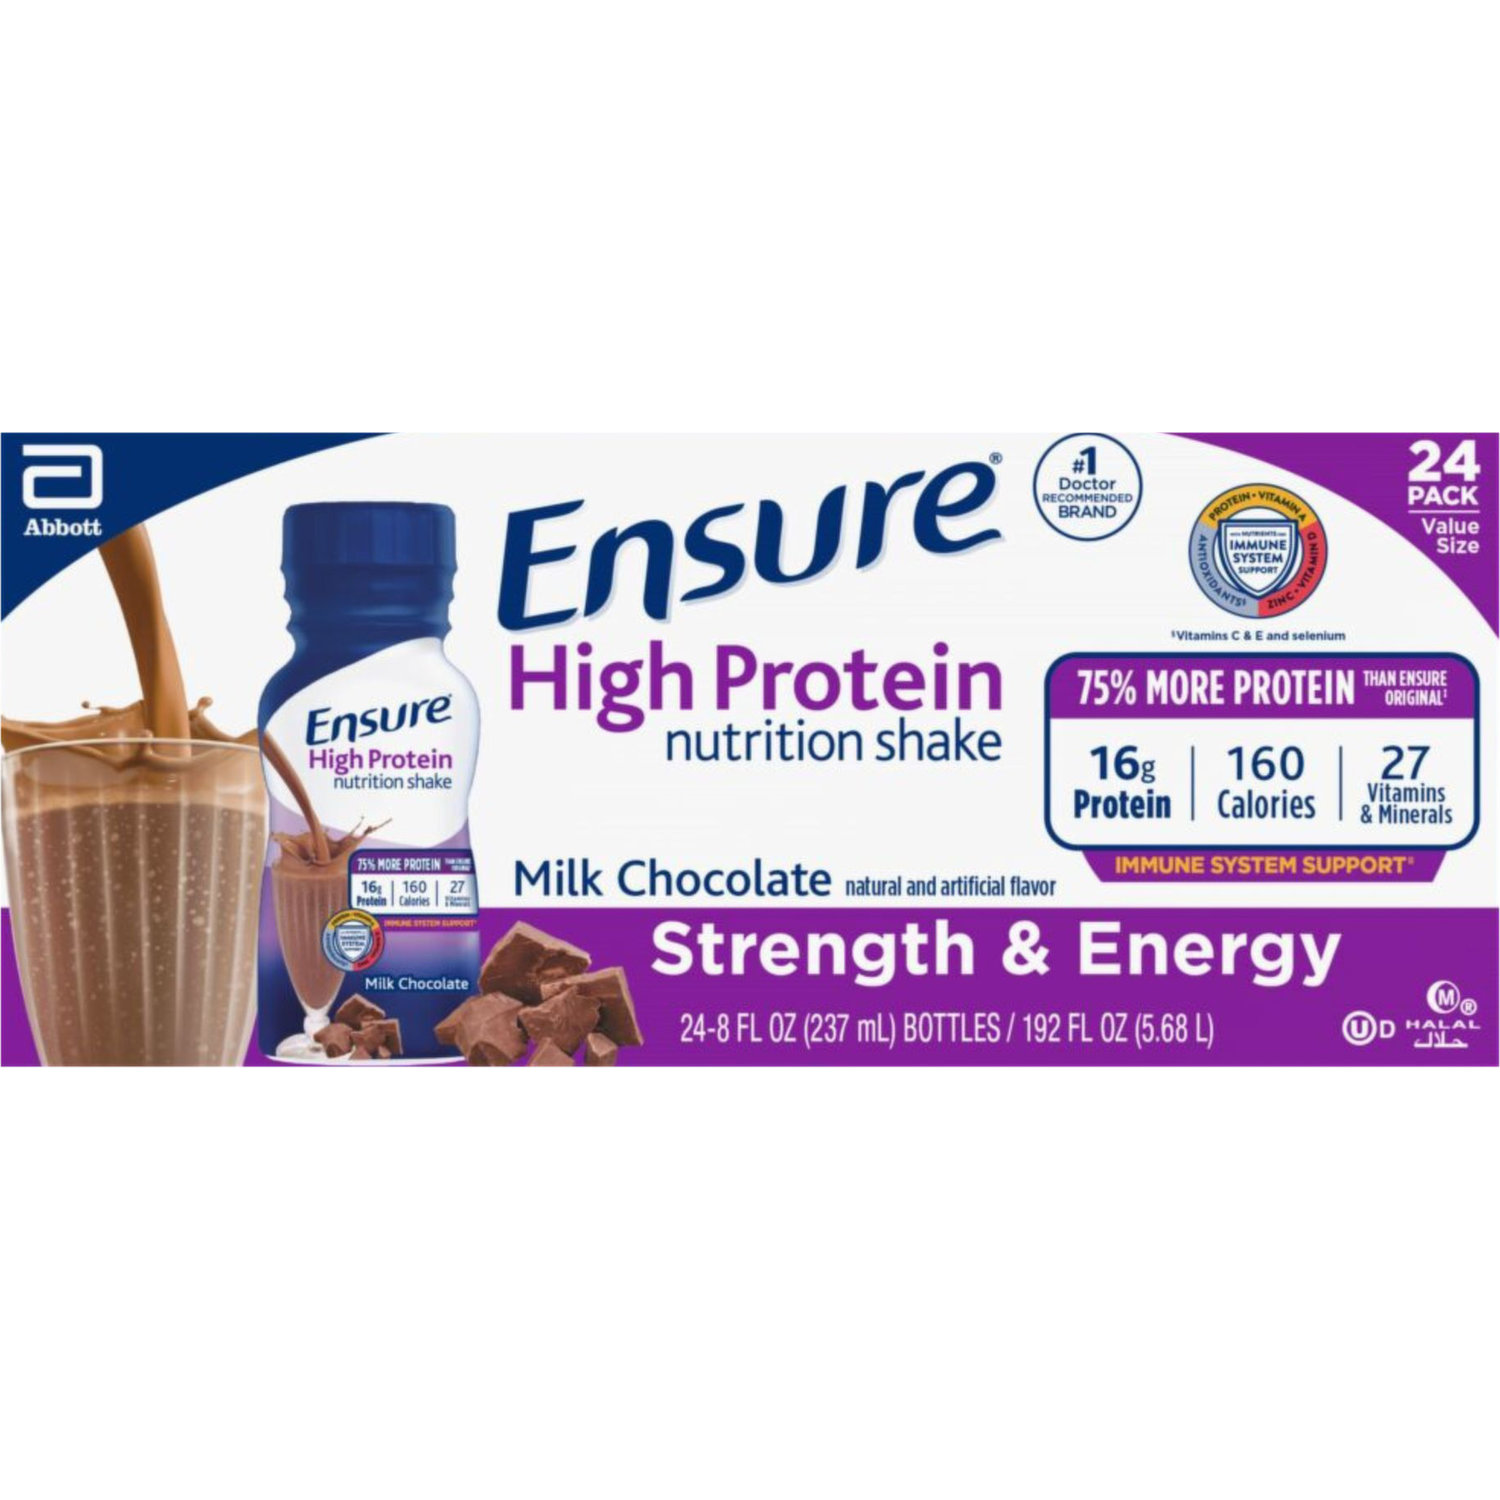  Ensure High Protein Nutritional Shake with 16g of